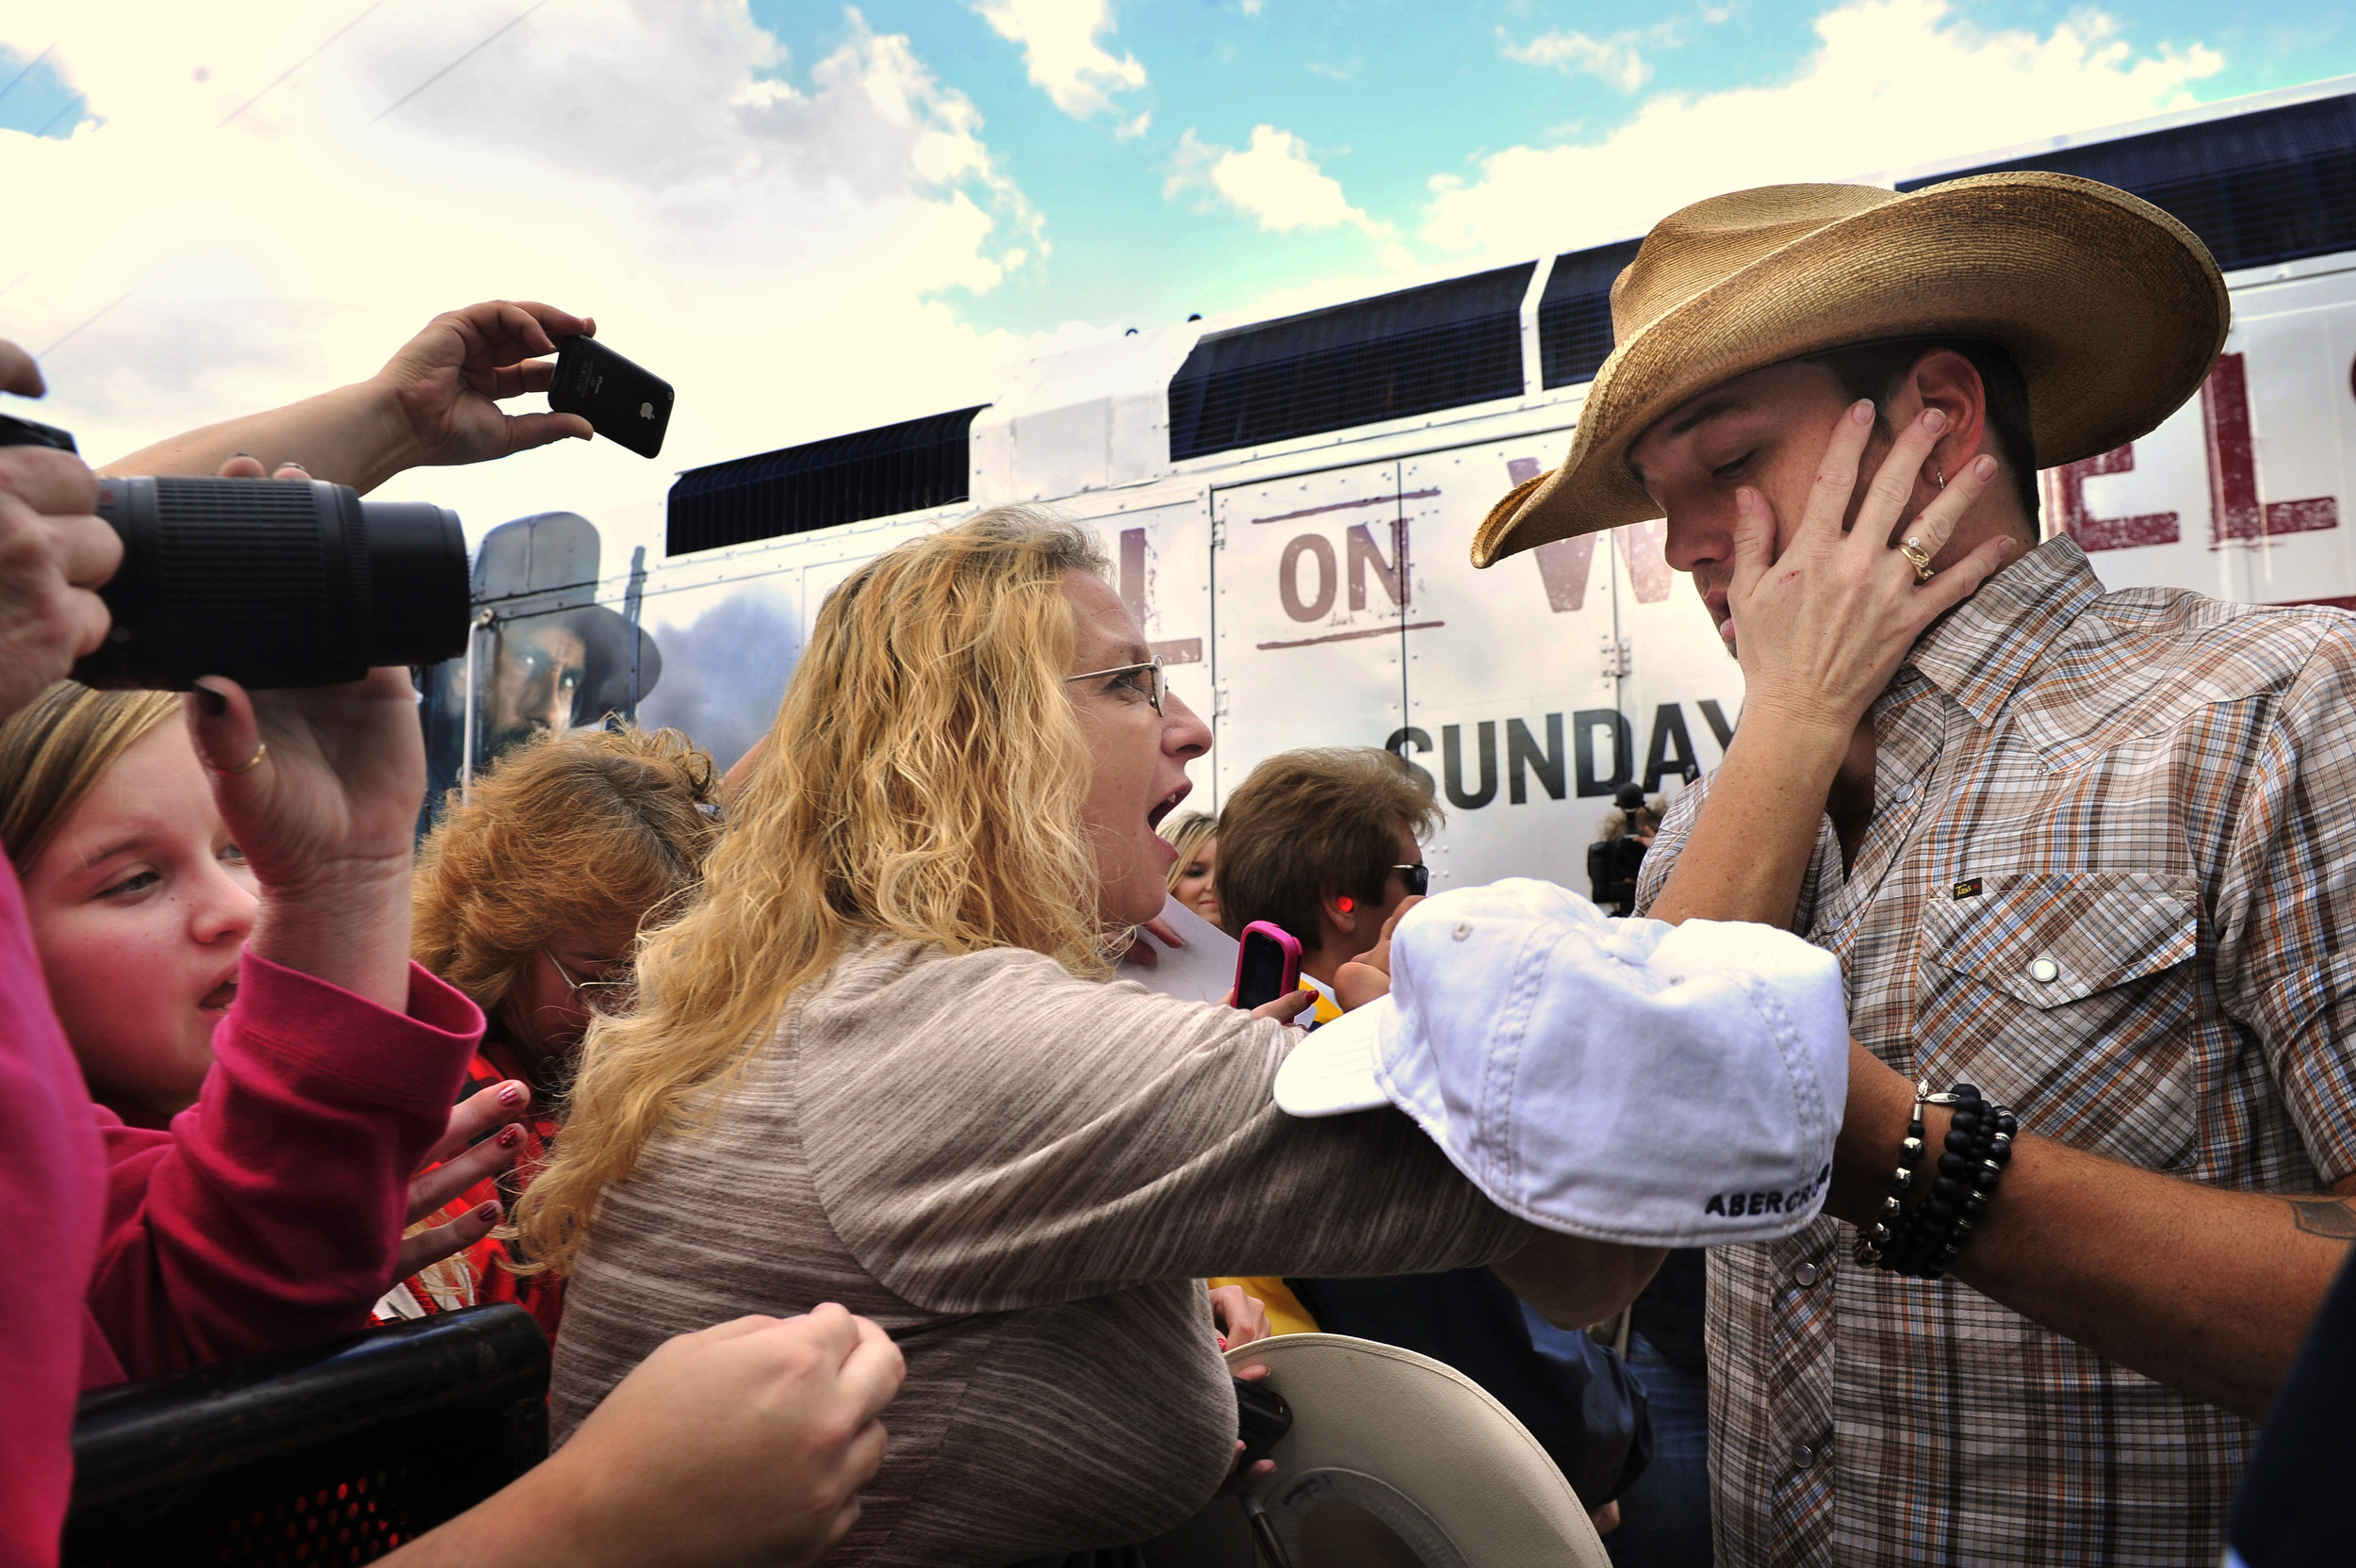  A fan touches Jason Aldean as he signs autographs for fans after a free concert at the riverfront downtown November 8, 2011 in Nashville, Tenn .  